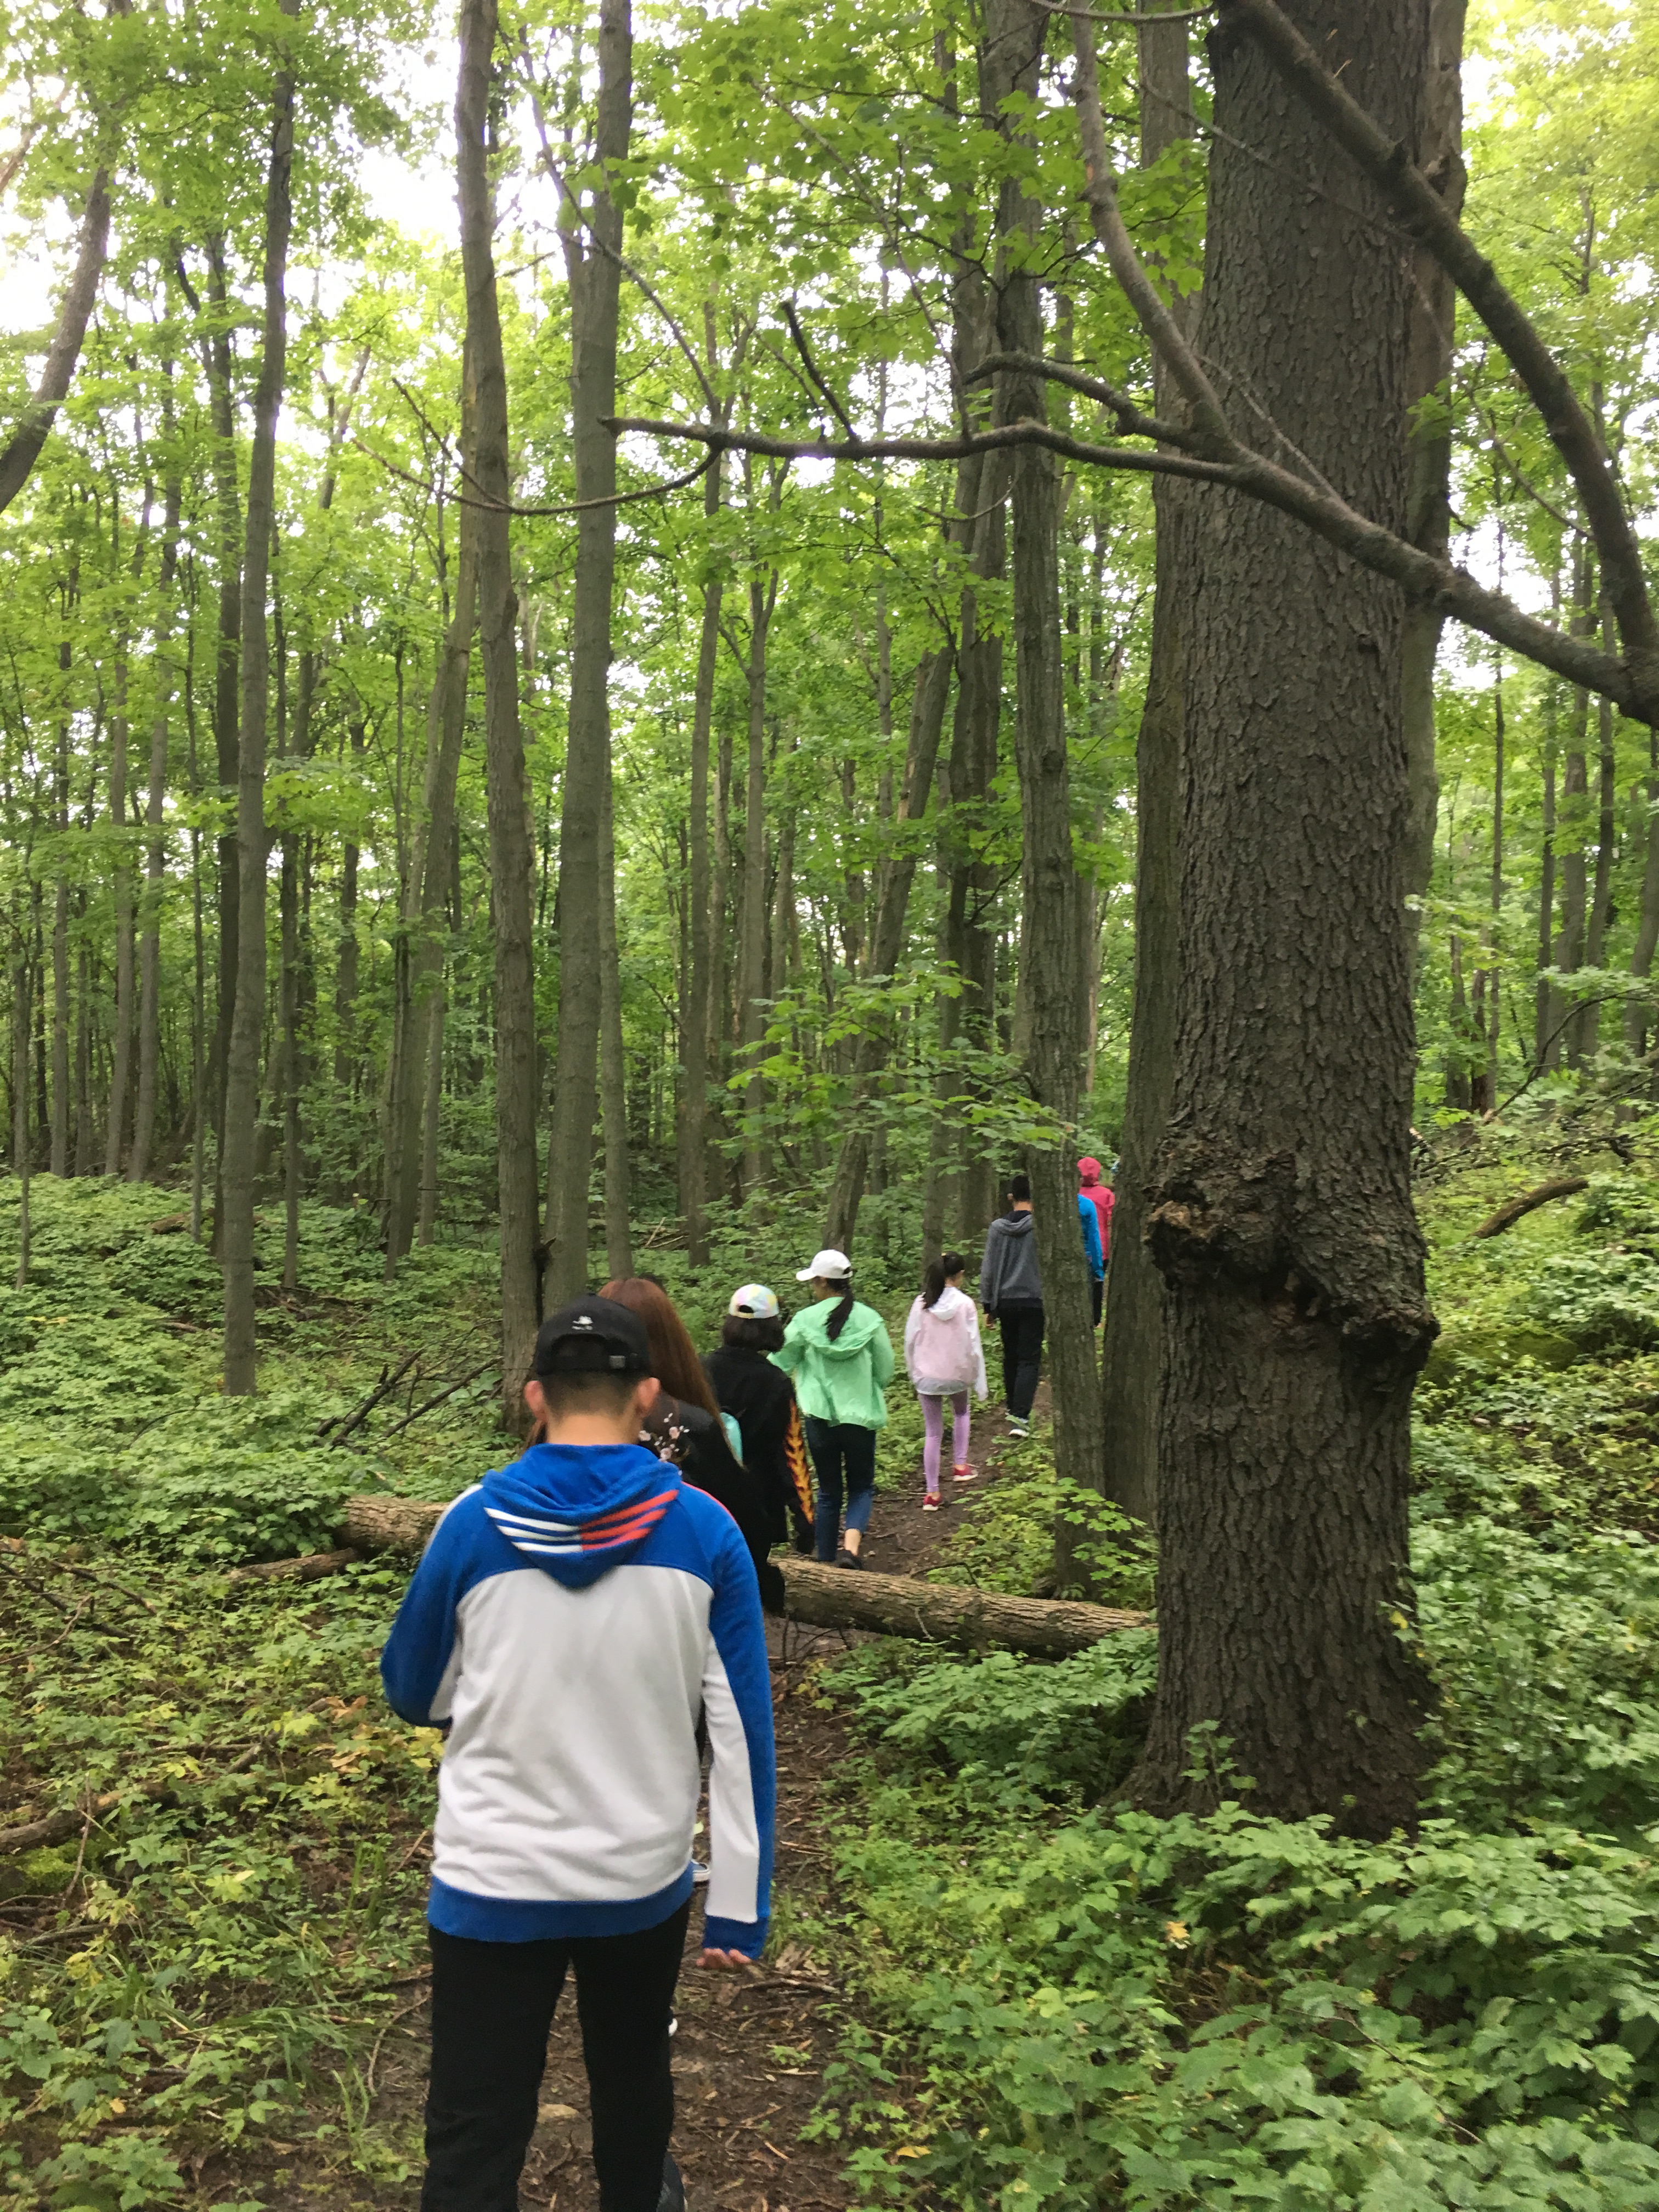 Students walking in a forest in a line Open Gallery